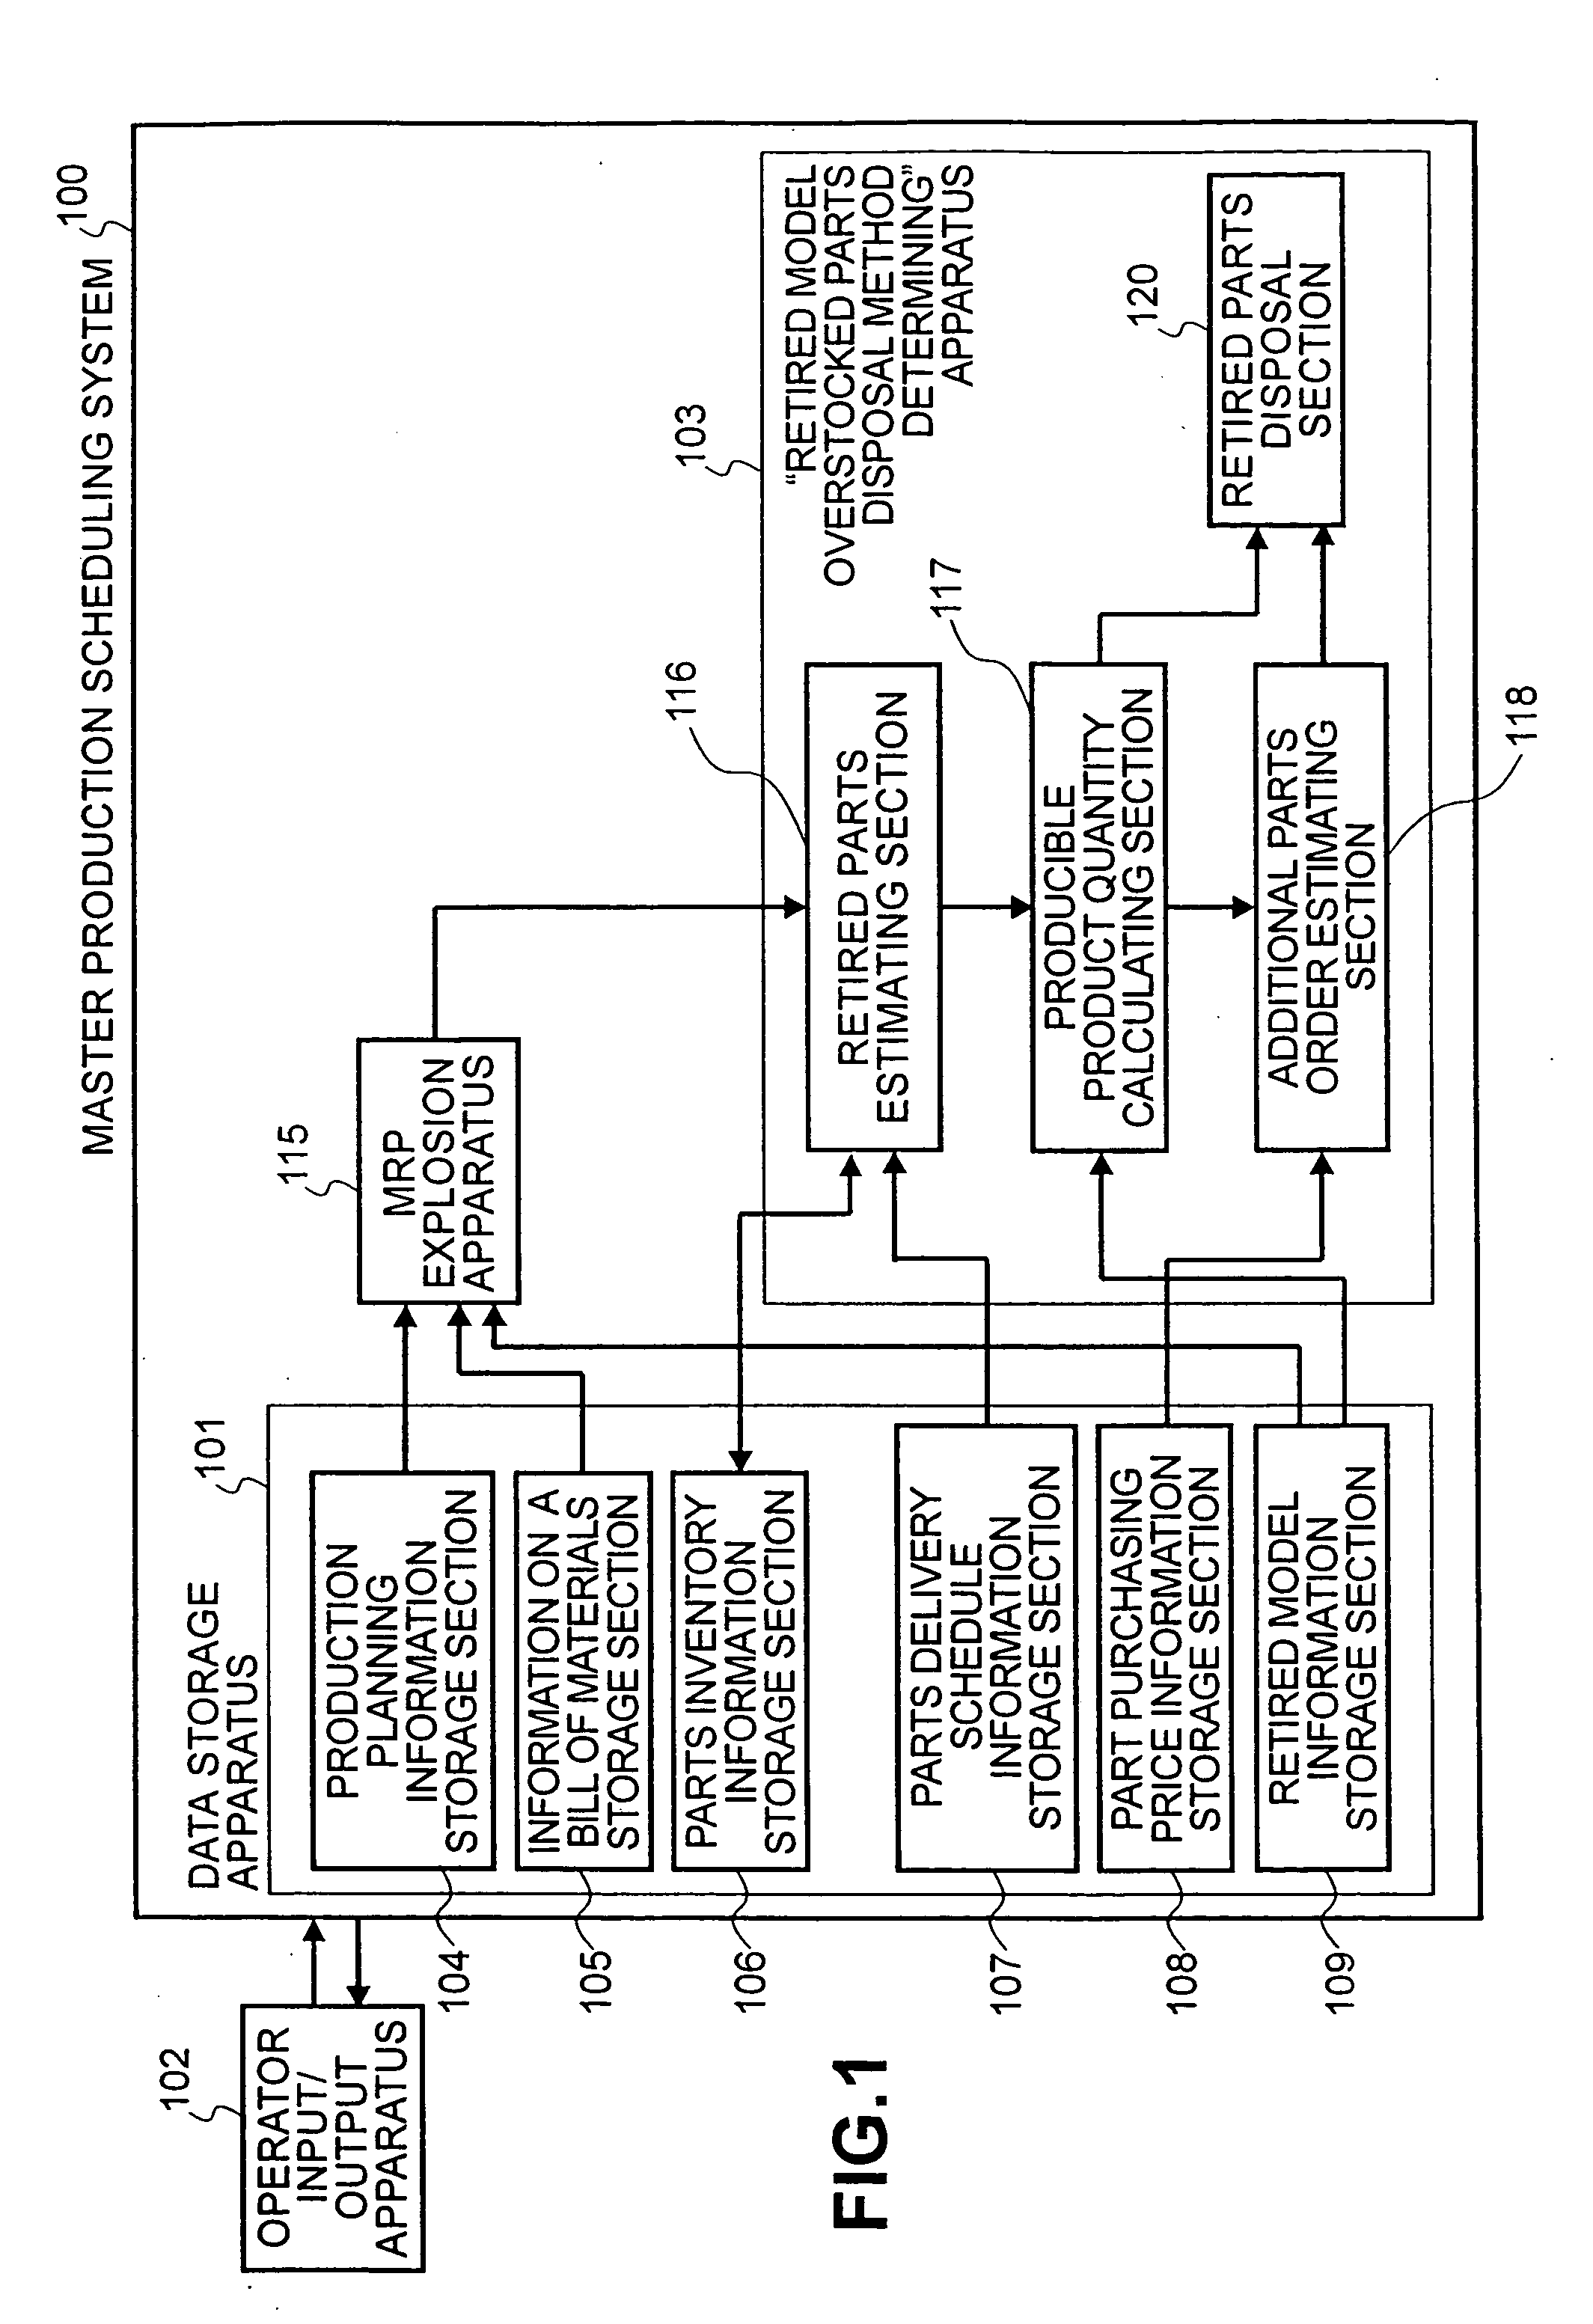 Production scheduling system